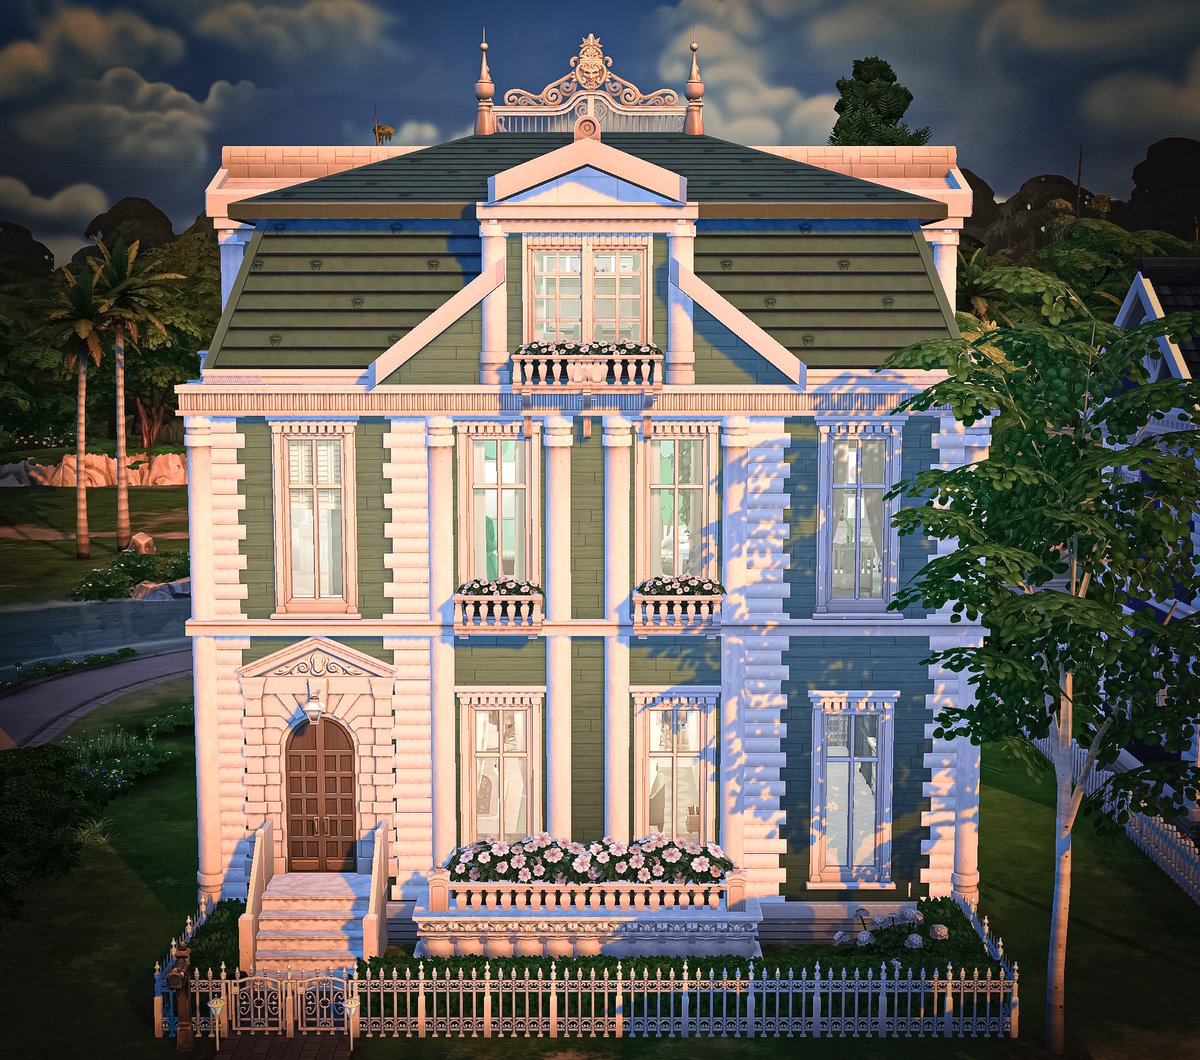 #TBT to my 63rd build, The Classic Green, which was my 3rd in a series of classic mini mansions.
#TheSims #TheSims4 #ShowUsYourBuilds @TheSims @TheSimmersSquad